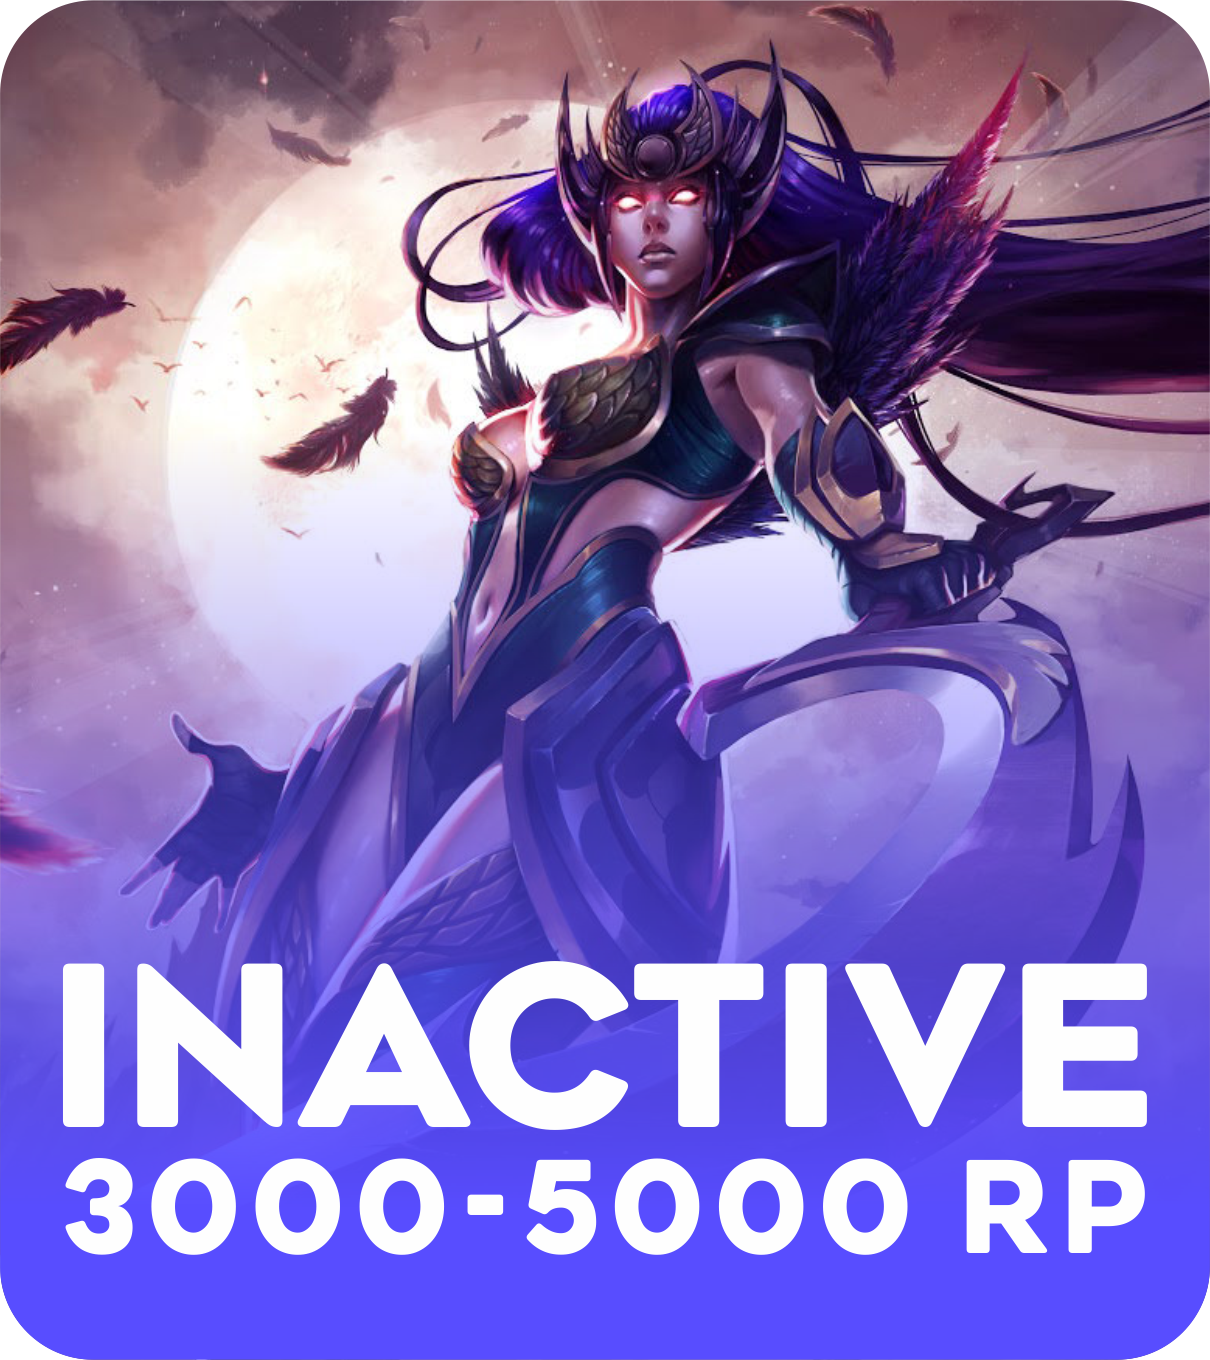 Inactive 3000-5000 RP Account